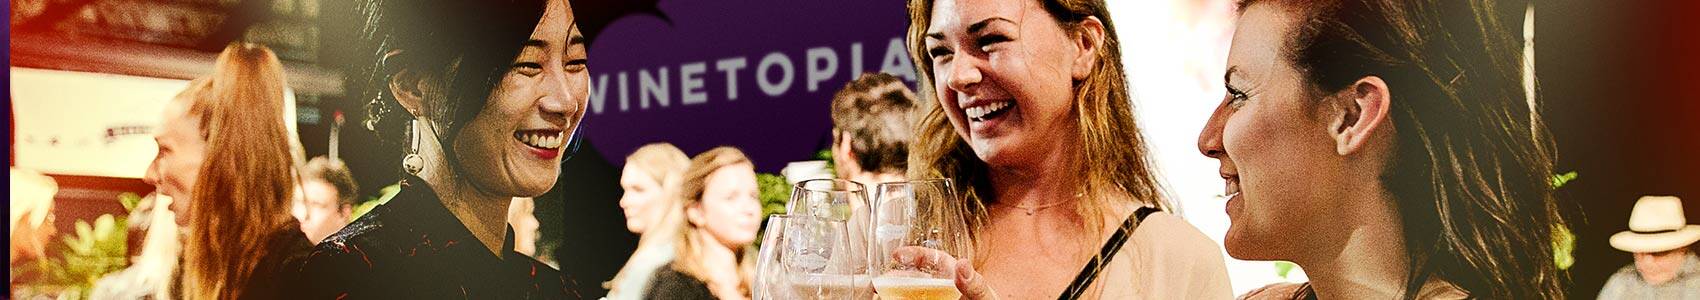 Winetopia returns promising to be bigger and better with the move to Viaduct Events Centre 